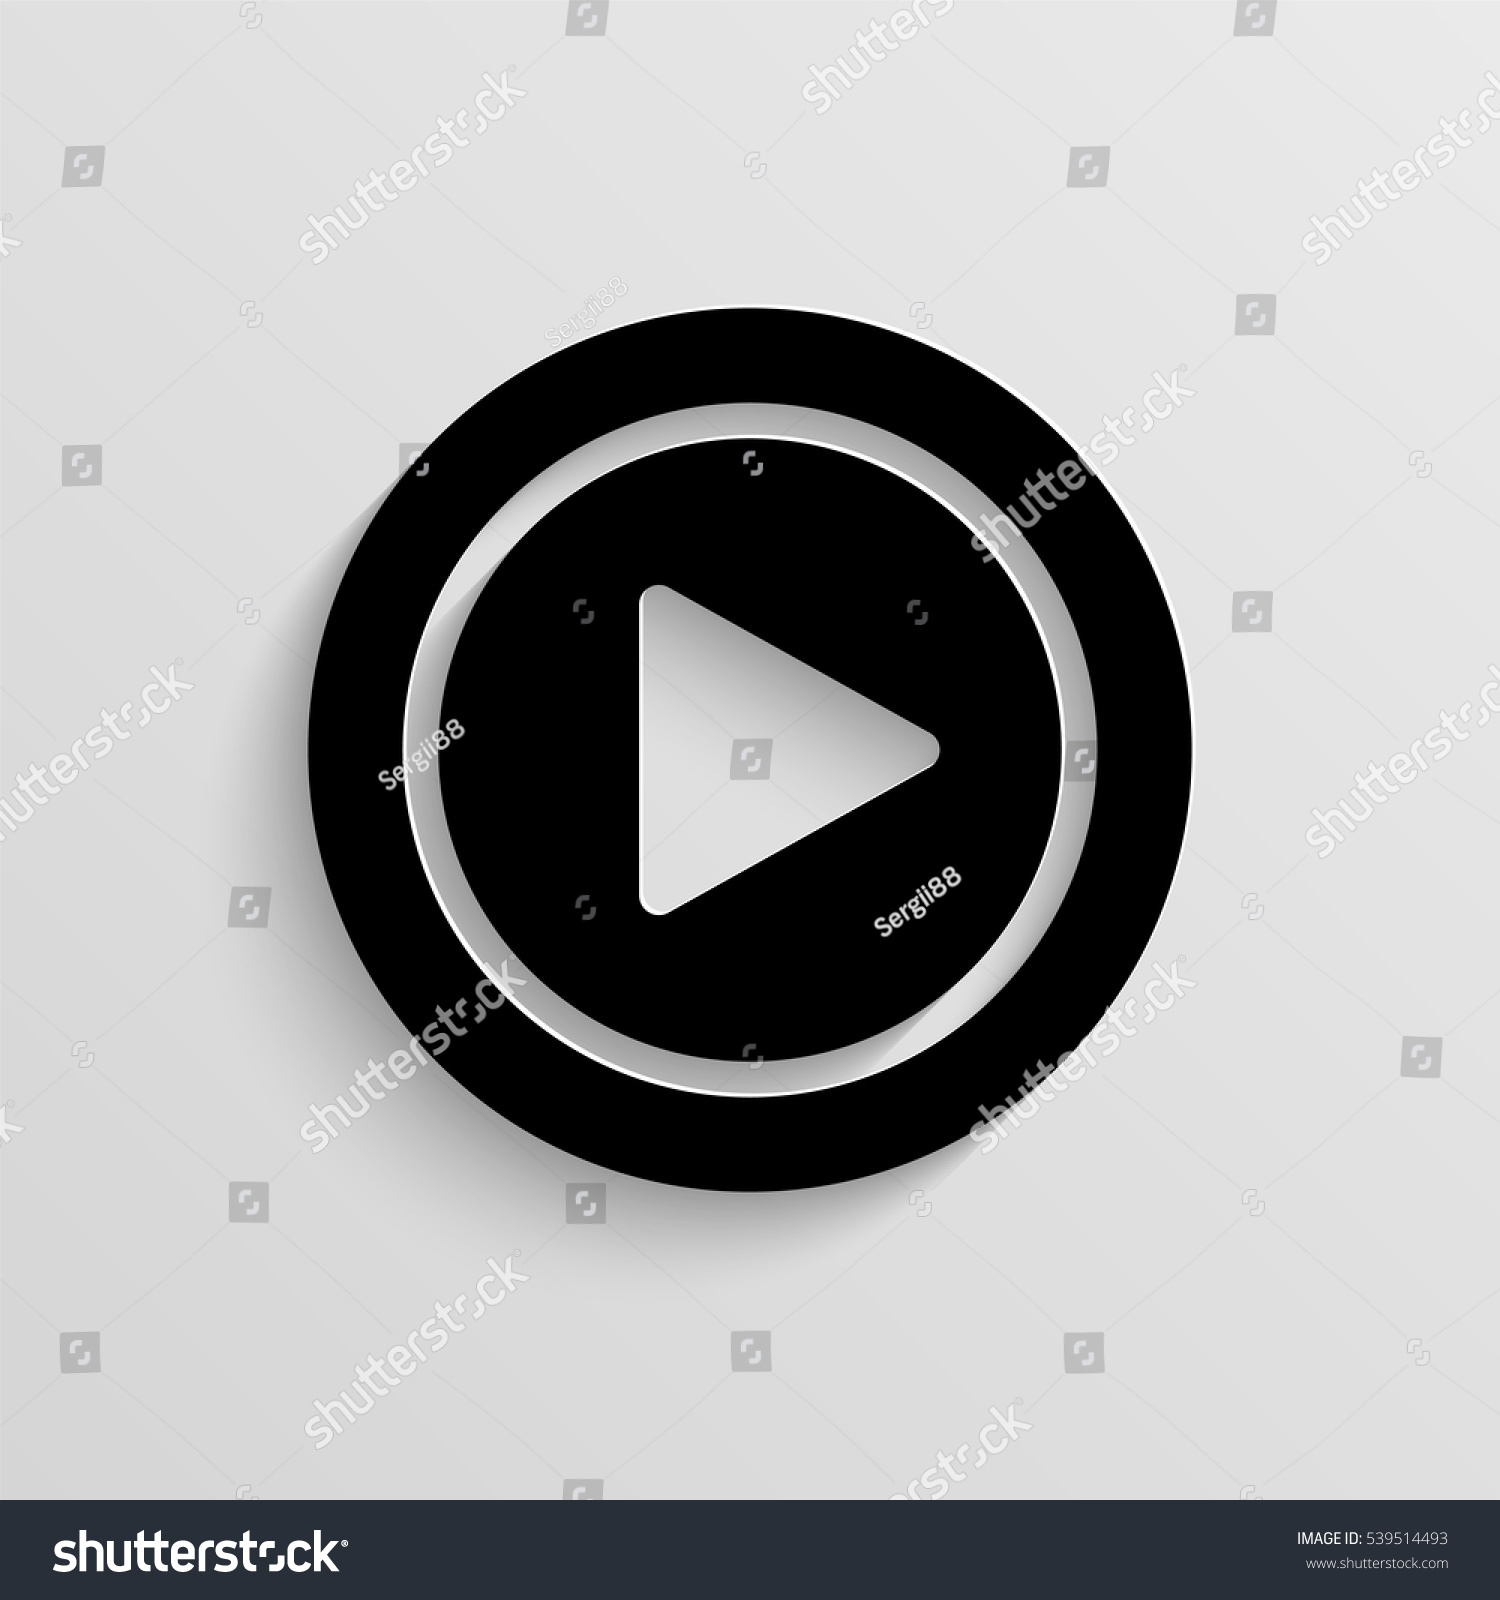 Play button vector icon with  shadow #539514493